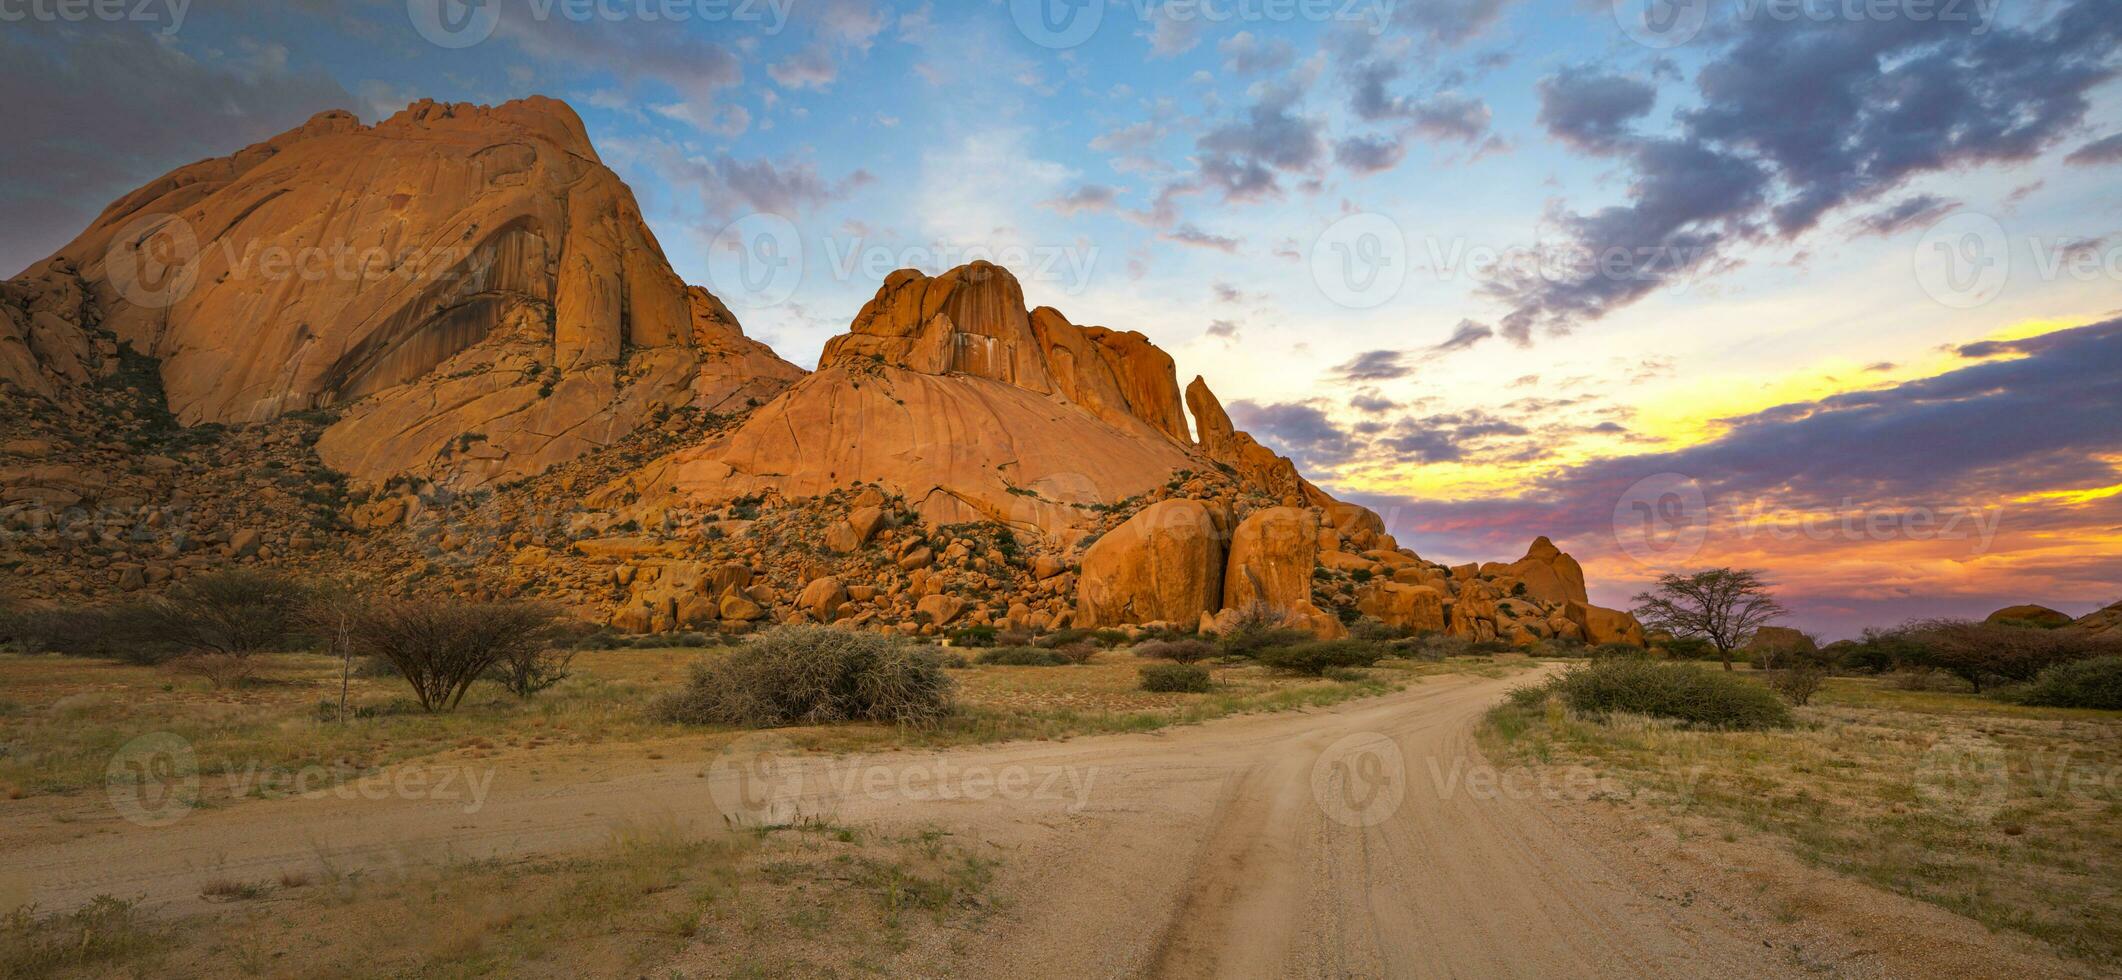 Granite rocks of Spitzkoppe with yellow and blue clouds at sunset photo